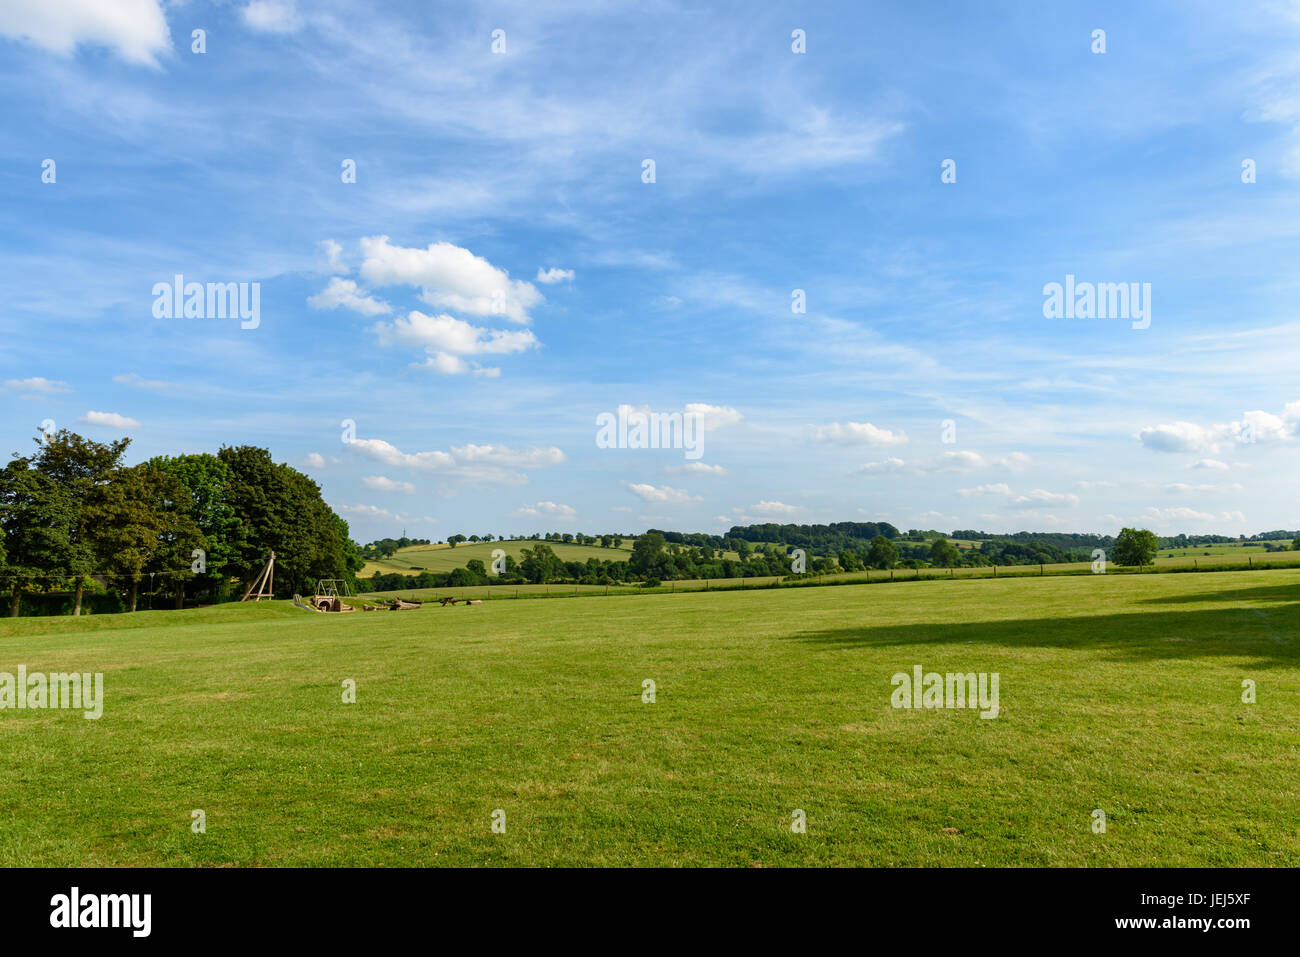 Guiting Power Village Hall Music Festival Ground, Cotswolds, REGNO UNITO Foto Stock